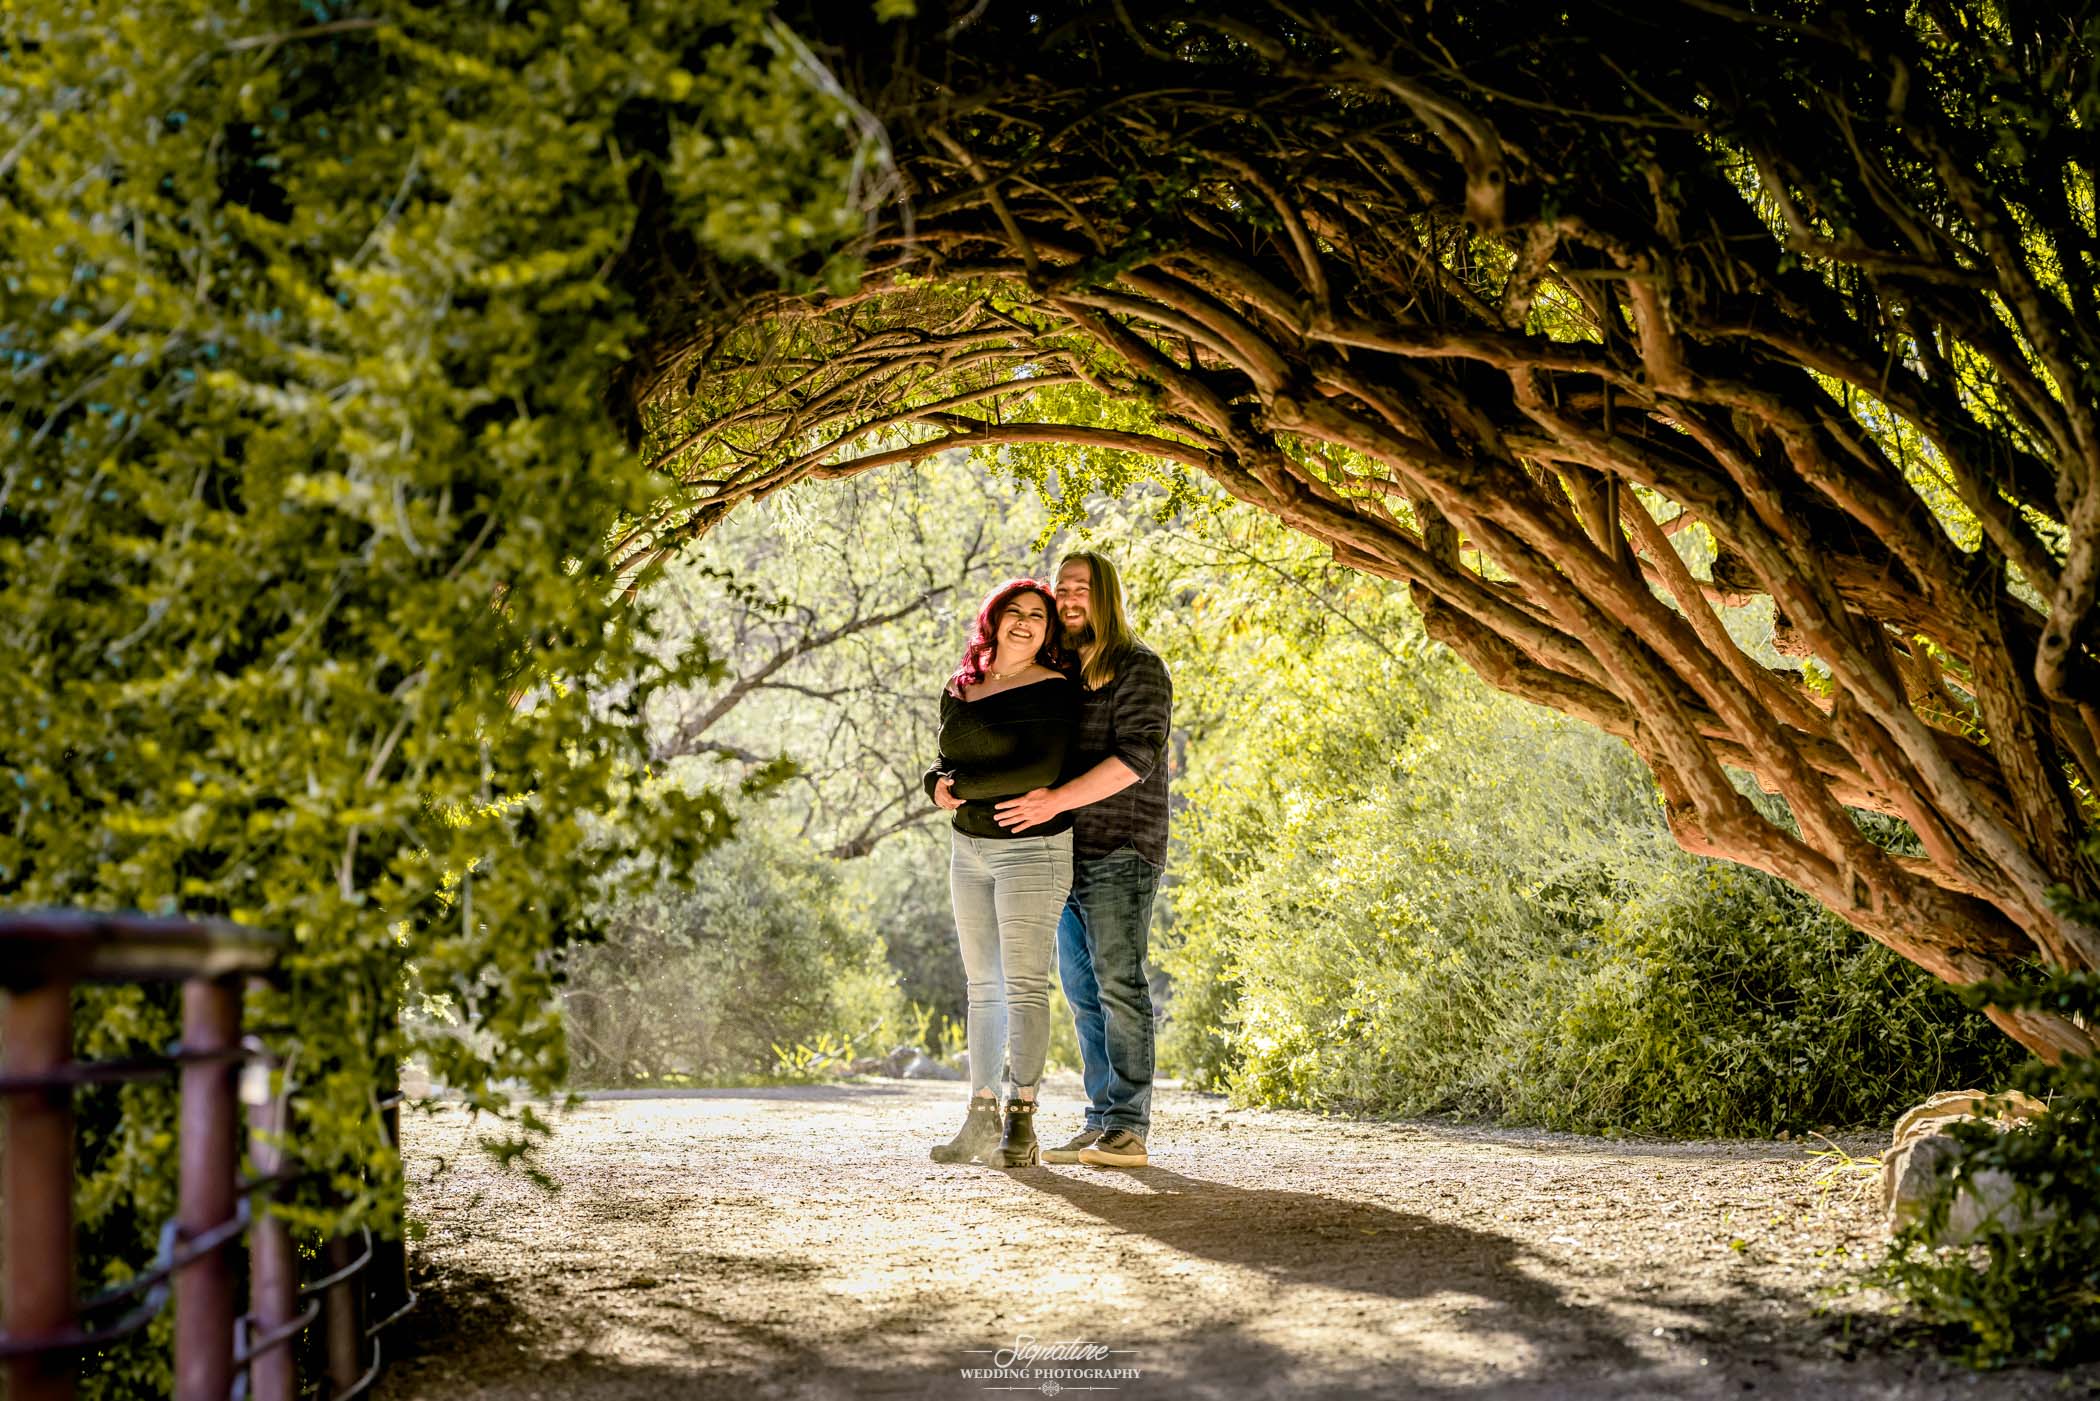 Man holding woman's waist smiling at camera under branch archway